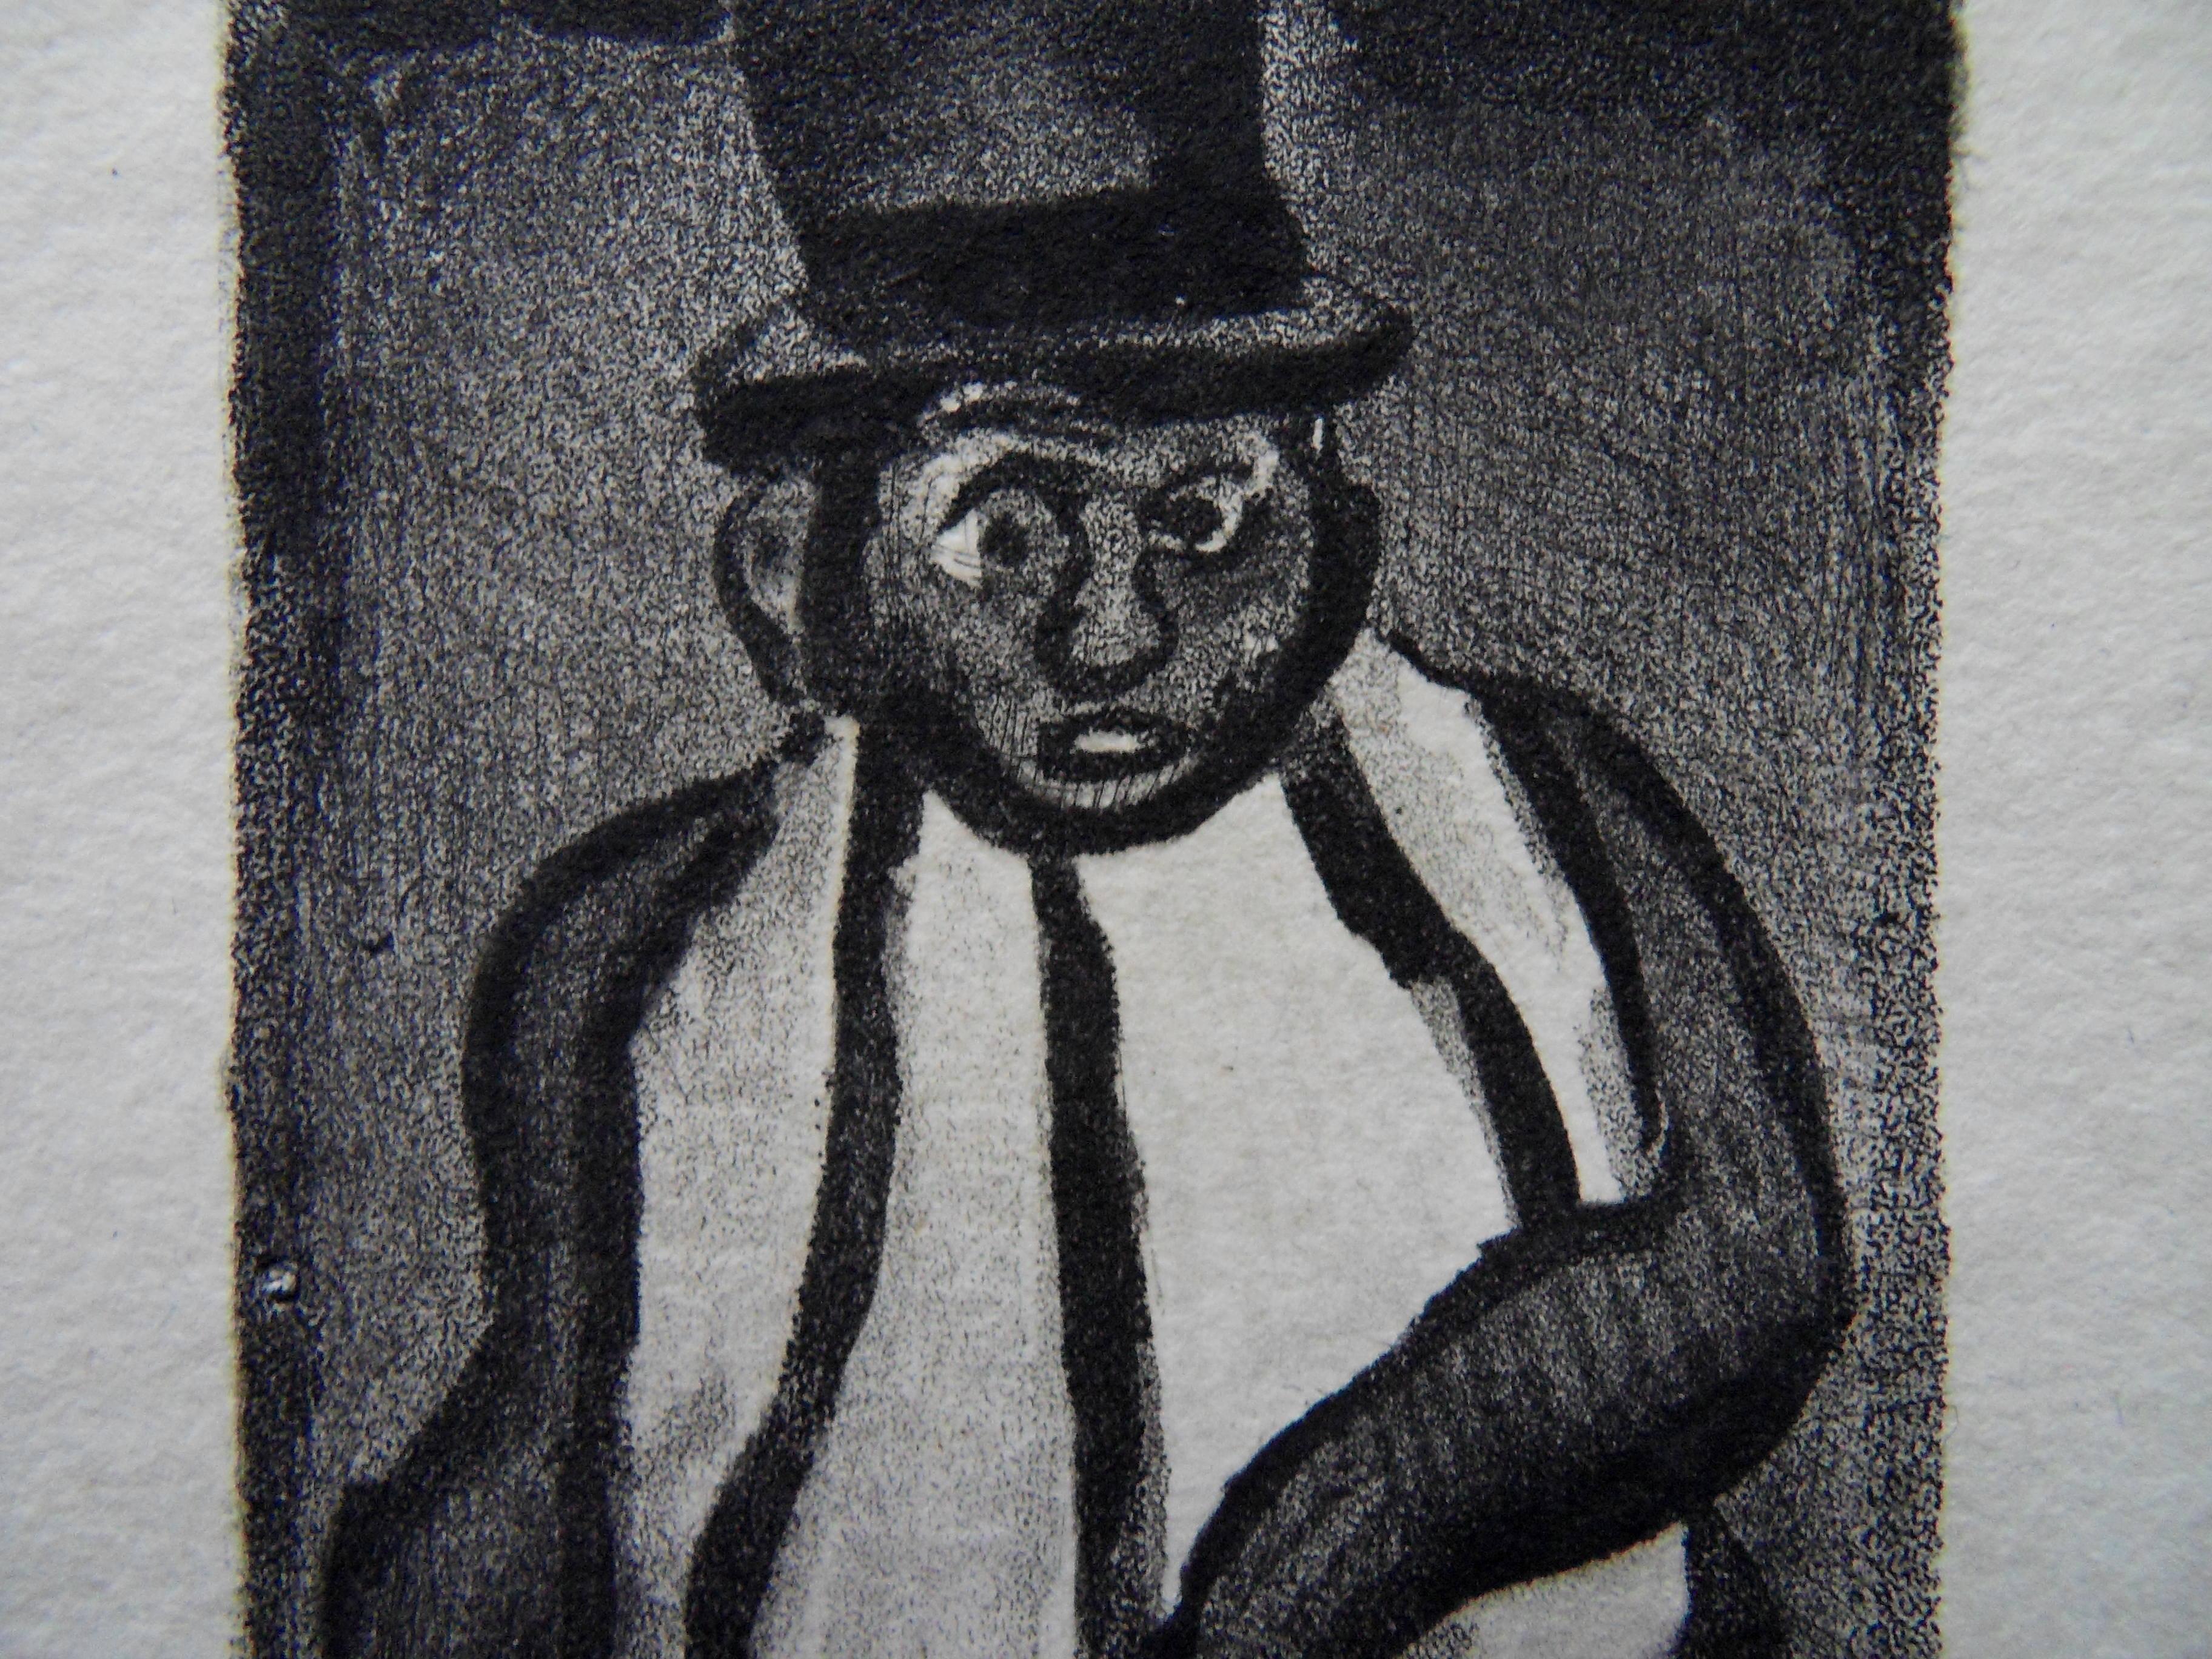 Elegant Man with a Top Hat - Original etching - 1929 - Gray Figurative Print by Georges Rouault